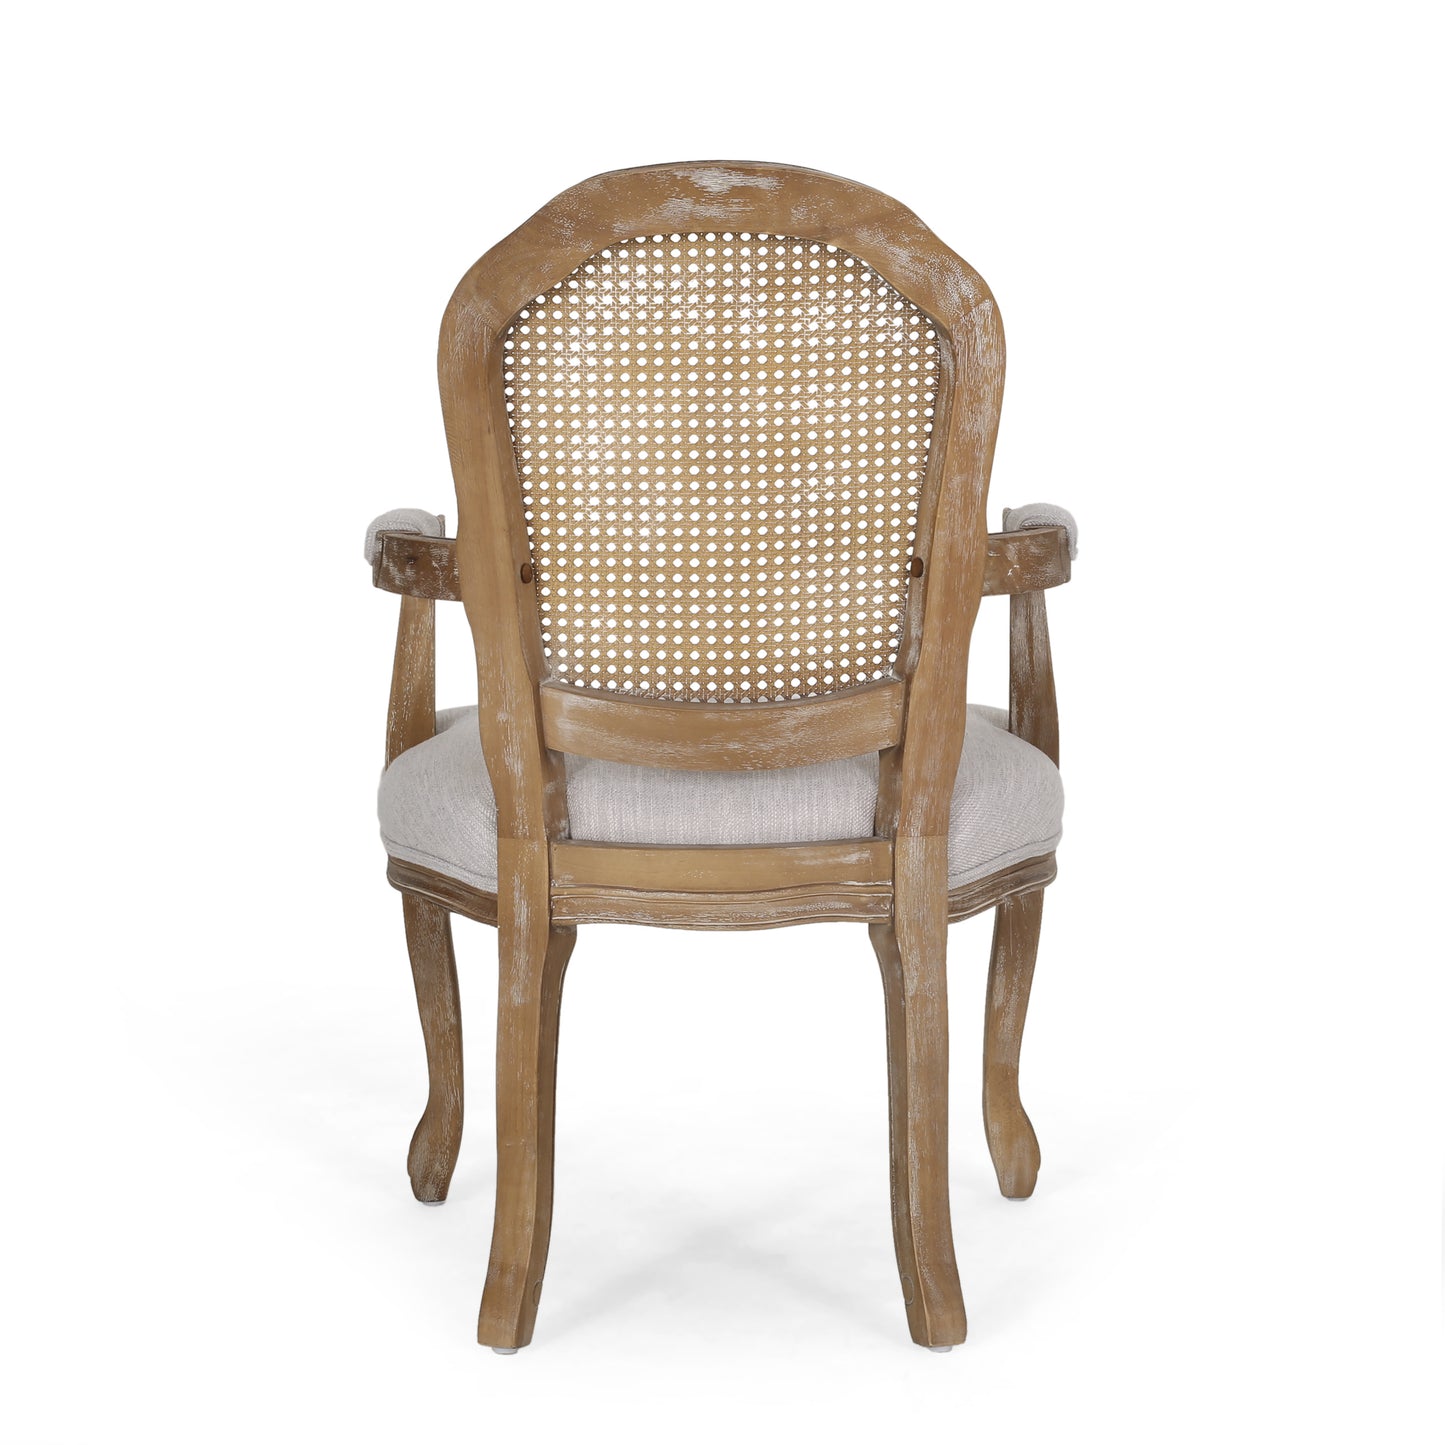 Mariette French Country Wood and Cane Upholstered Dining Chair, Set of 6